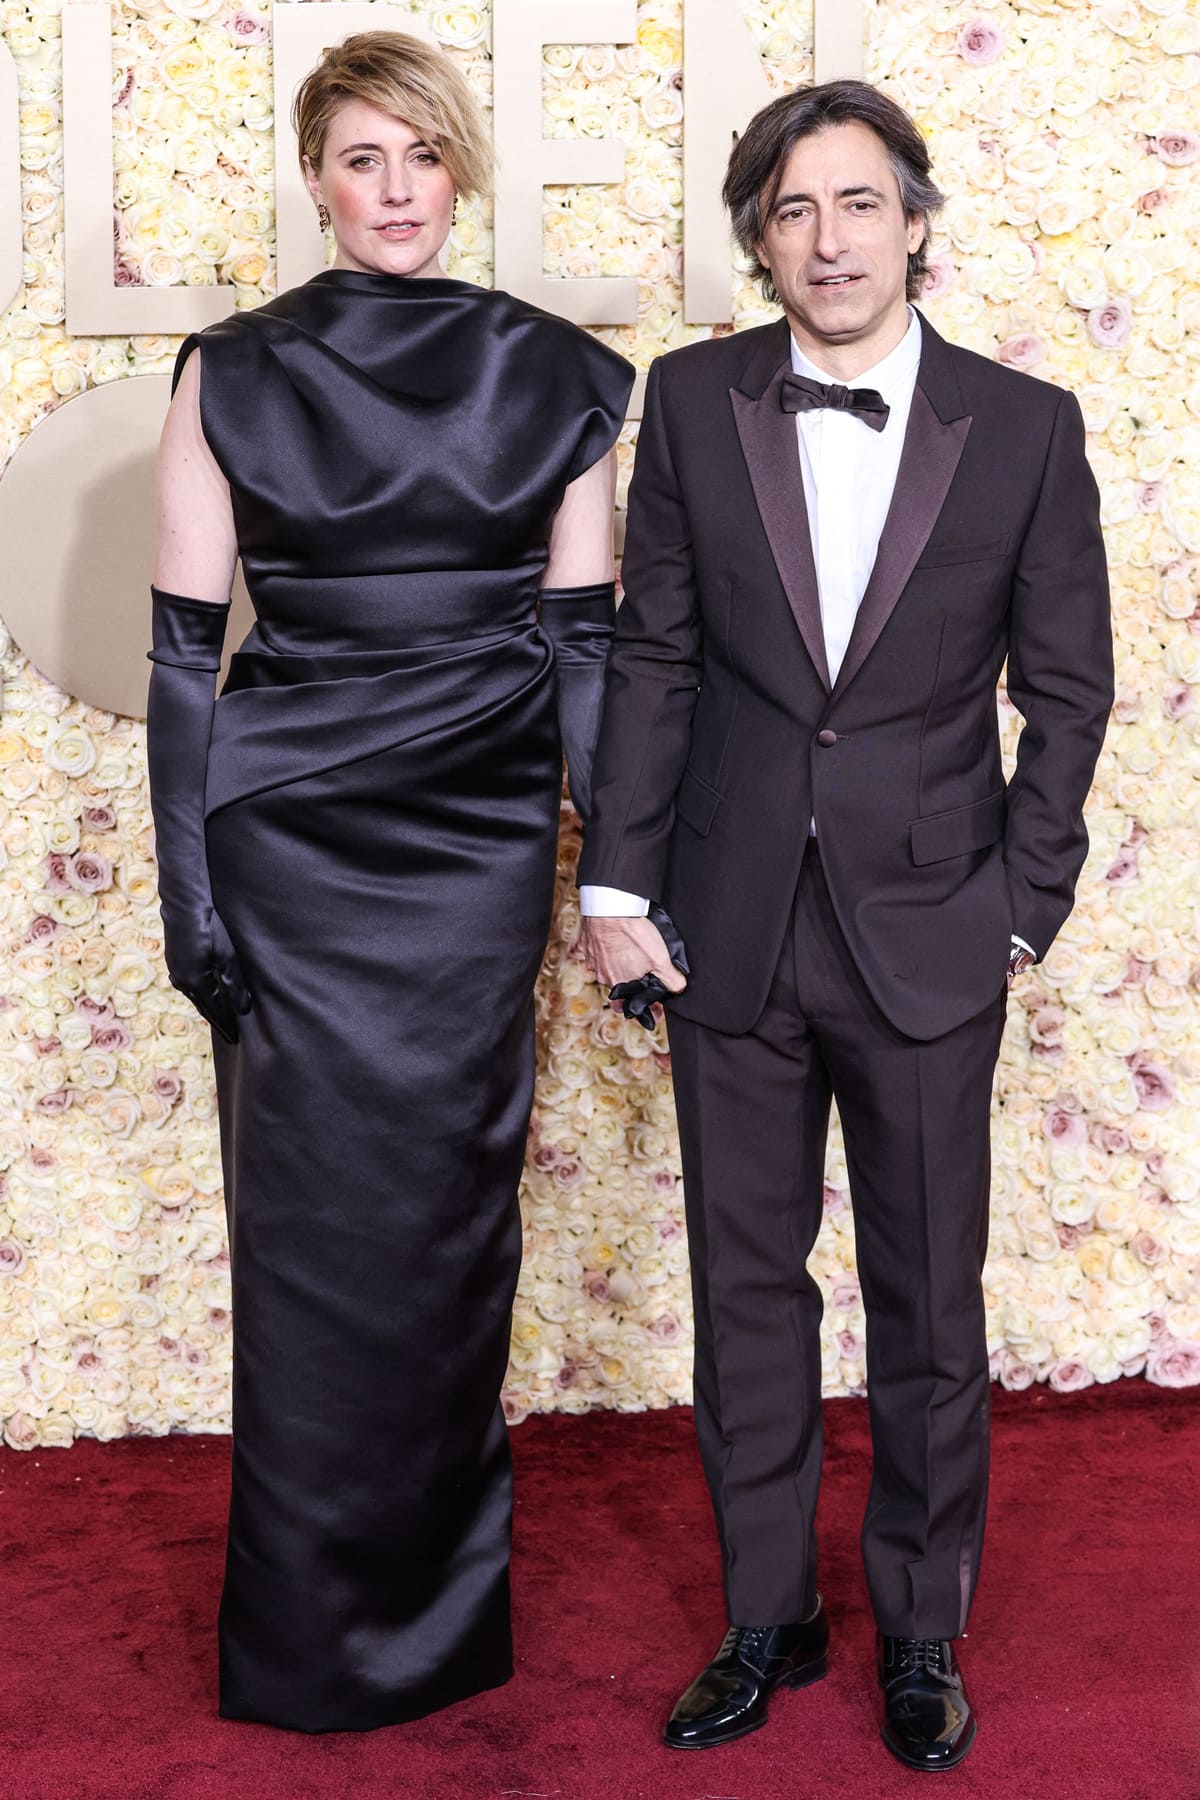 Red Carpet Royalty: Gerwig and Baumbach make a stylish statement in coordinated black outfits